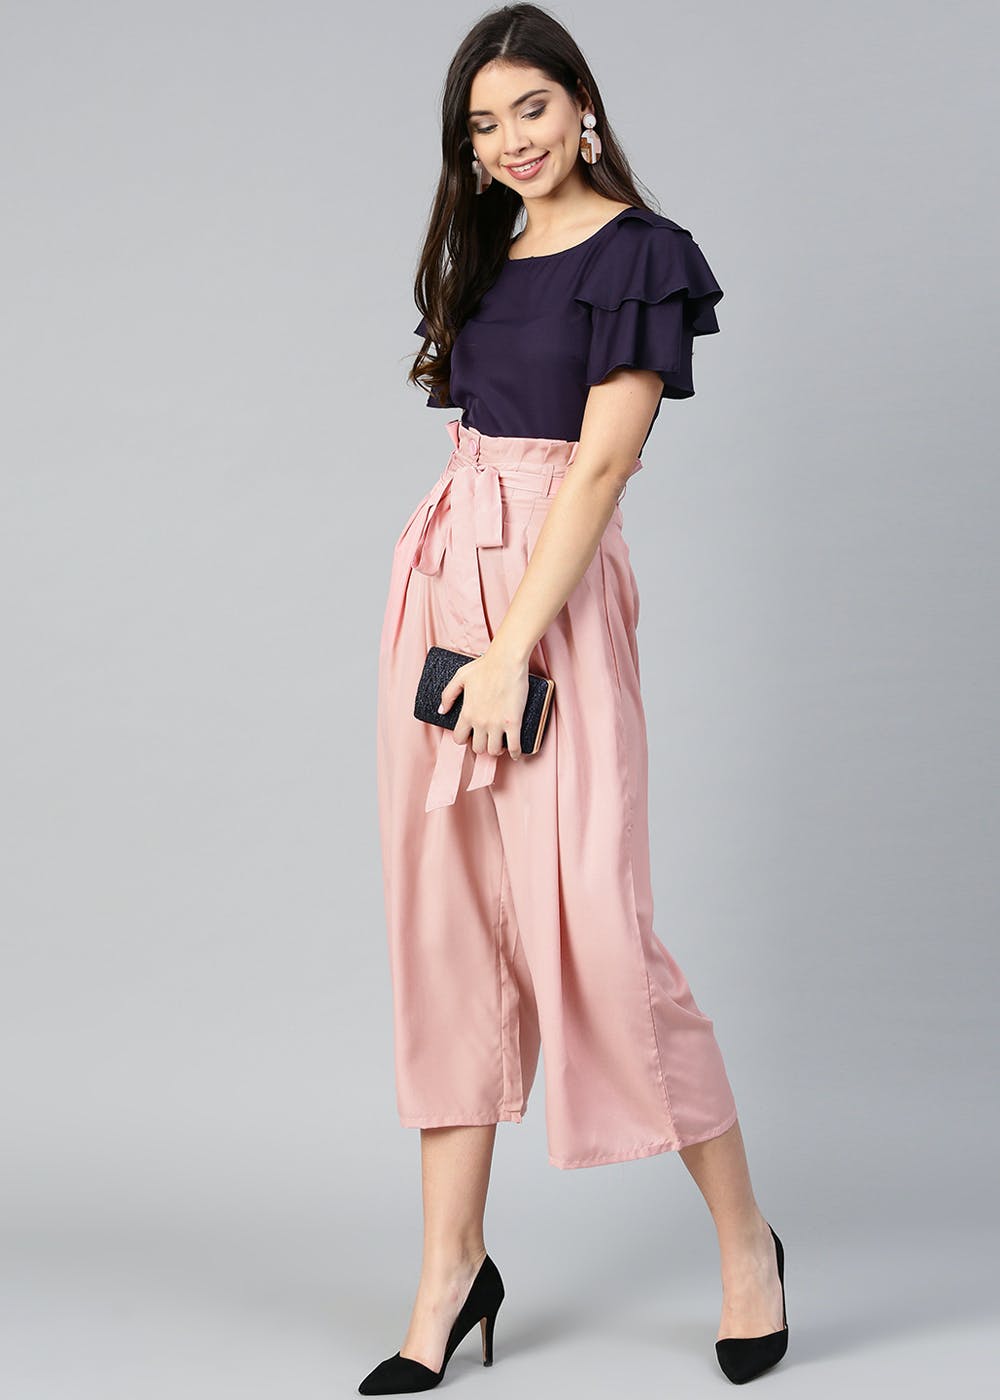 Pink Floral Top and White Trousers Set  BInfinite